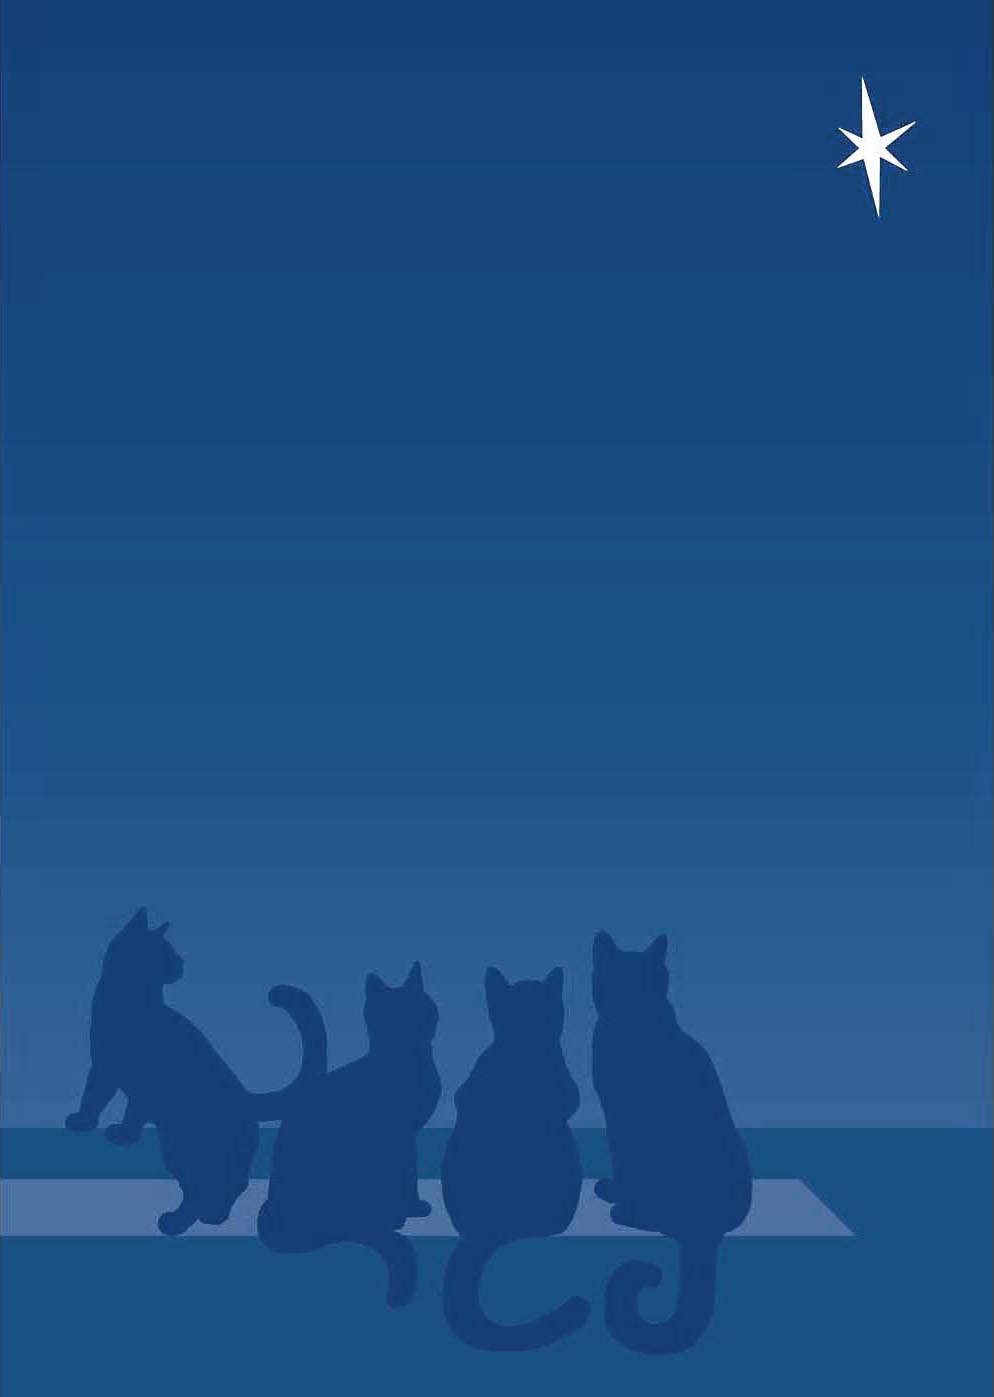 holiday card featuring kittens looking at star